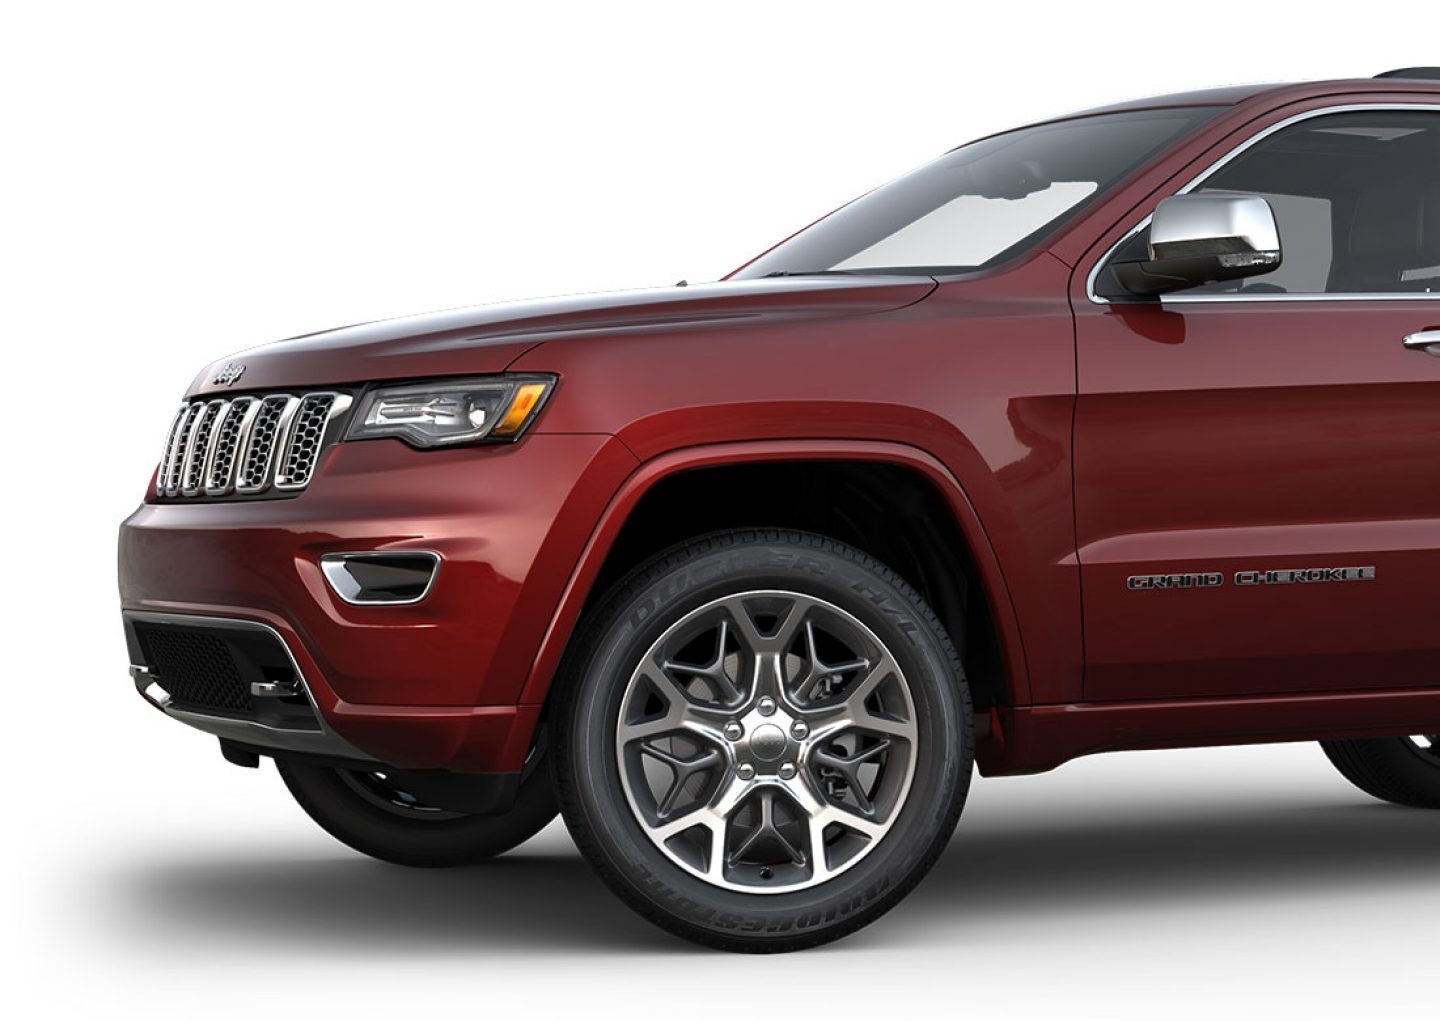 2017-Jeep-Grand-Cherokee-Exterior-Wheels-Overland-20-Inch-Polished-Aluminum-Wheel-with-Technical-Gray-Painted-Pockets